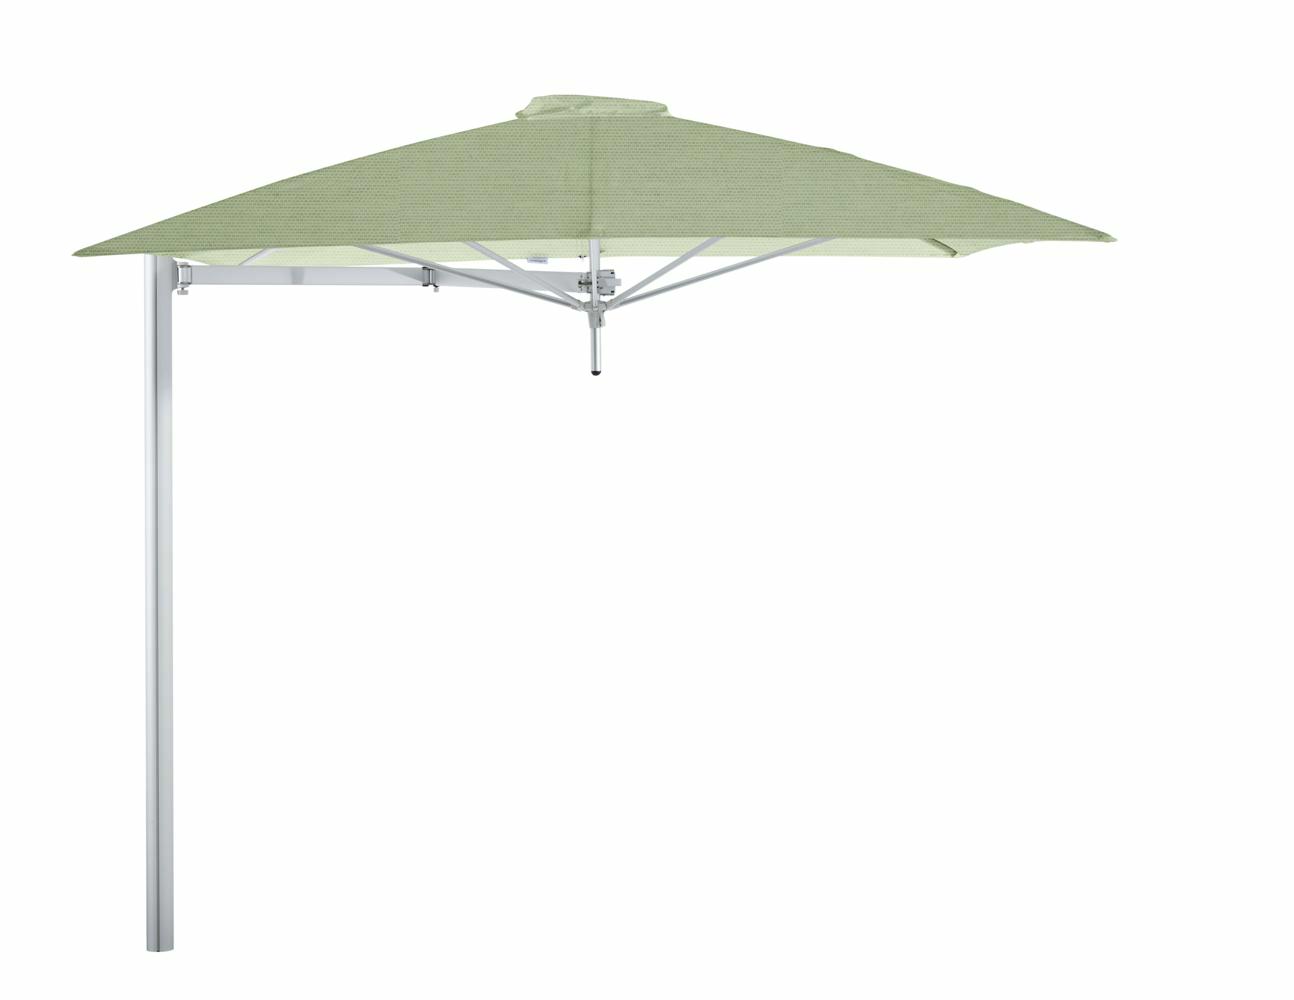 Paraflex cantilever umbrella square 2,3 m with Mint fabric and a Neo arm